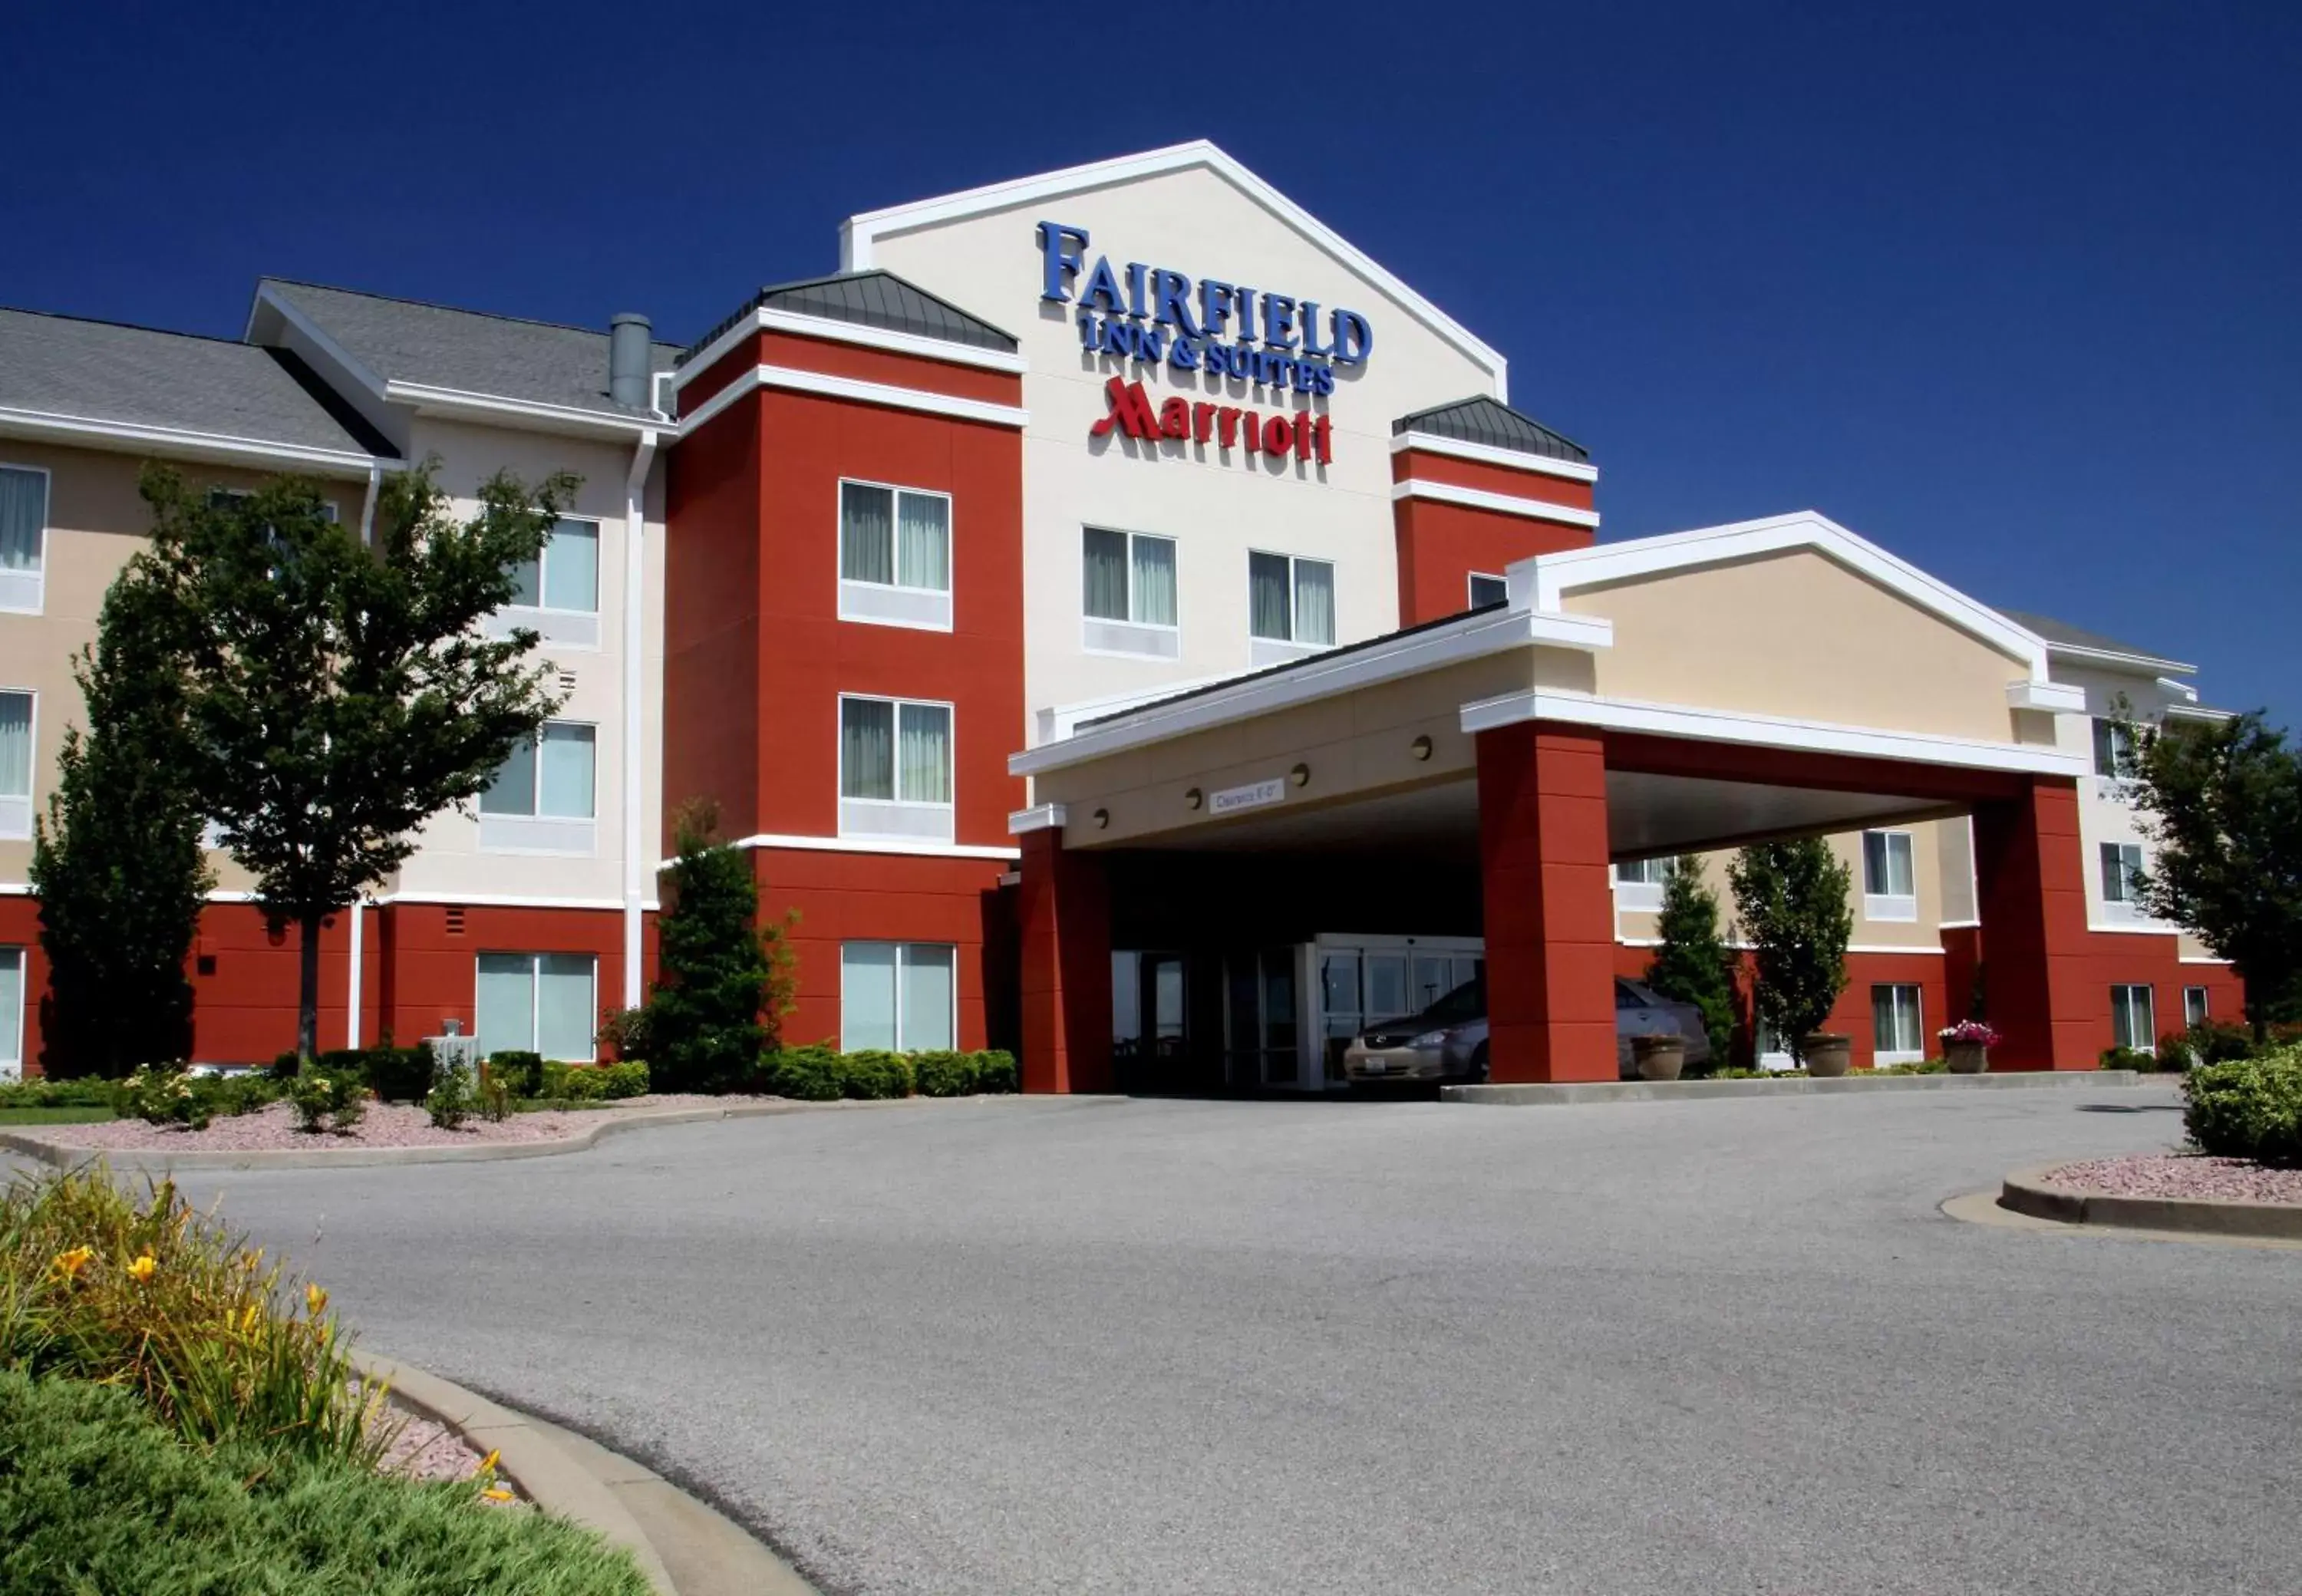 Property building in Fairfield Inn and Suites by Marriott Marion